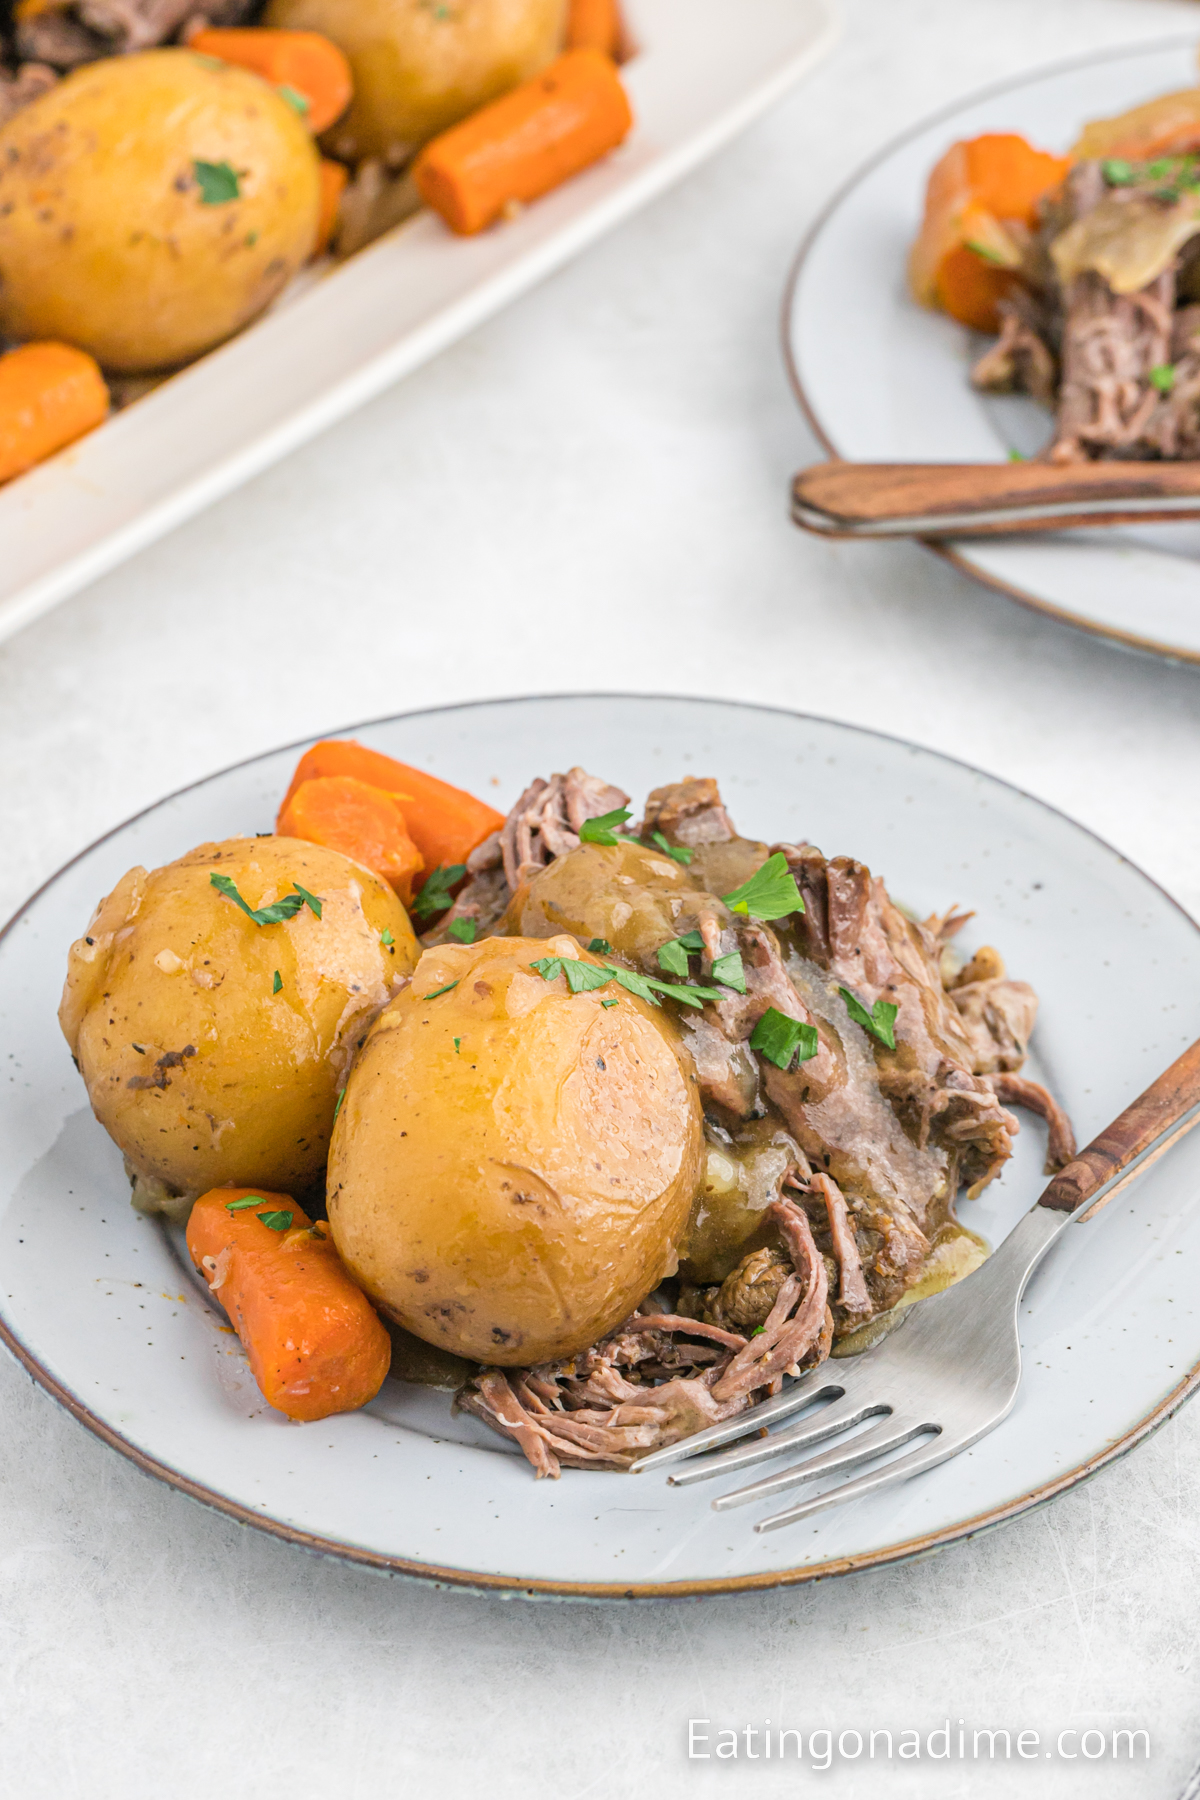 Chuck roast with potatoes and carrots on a plate